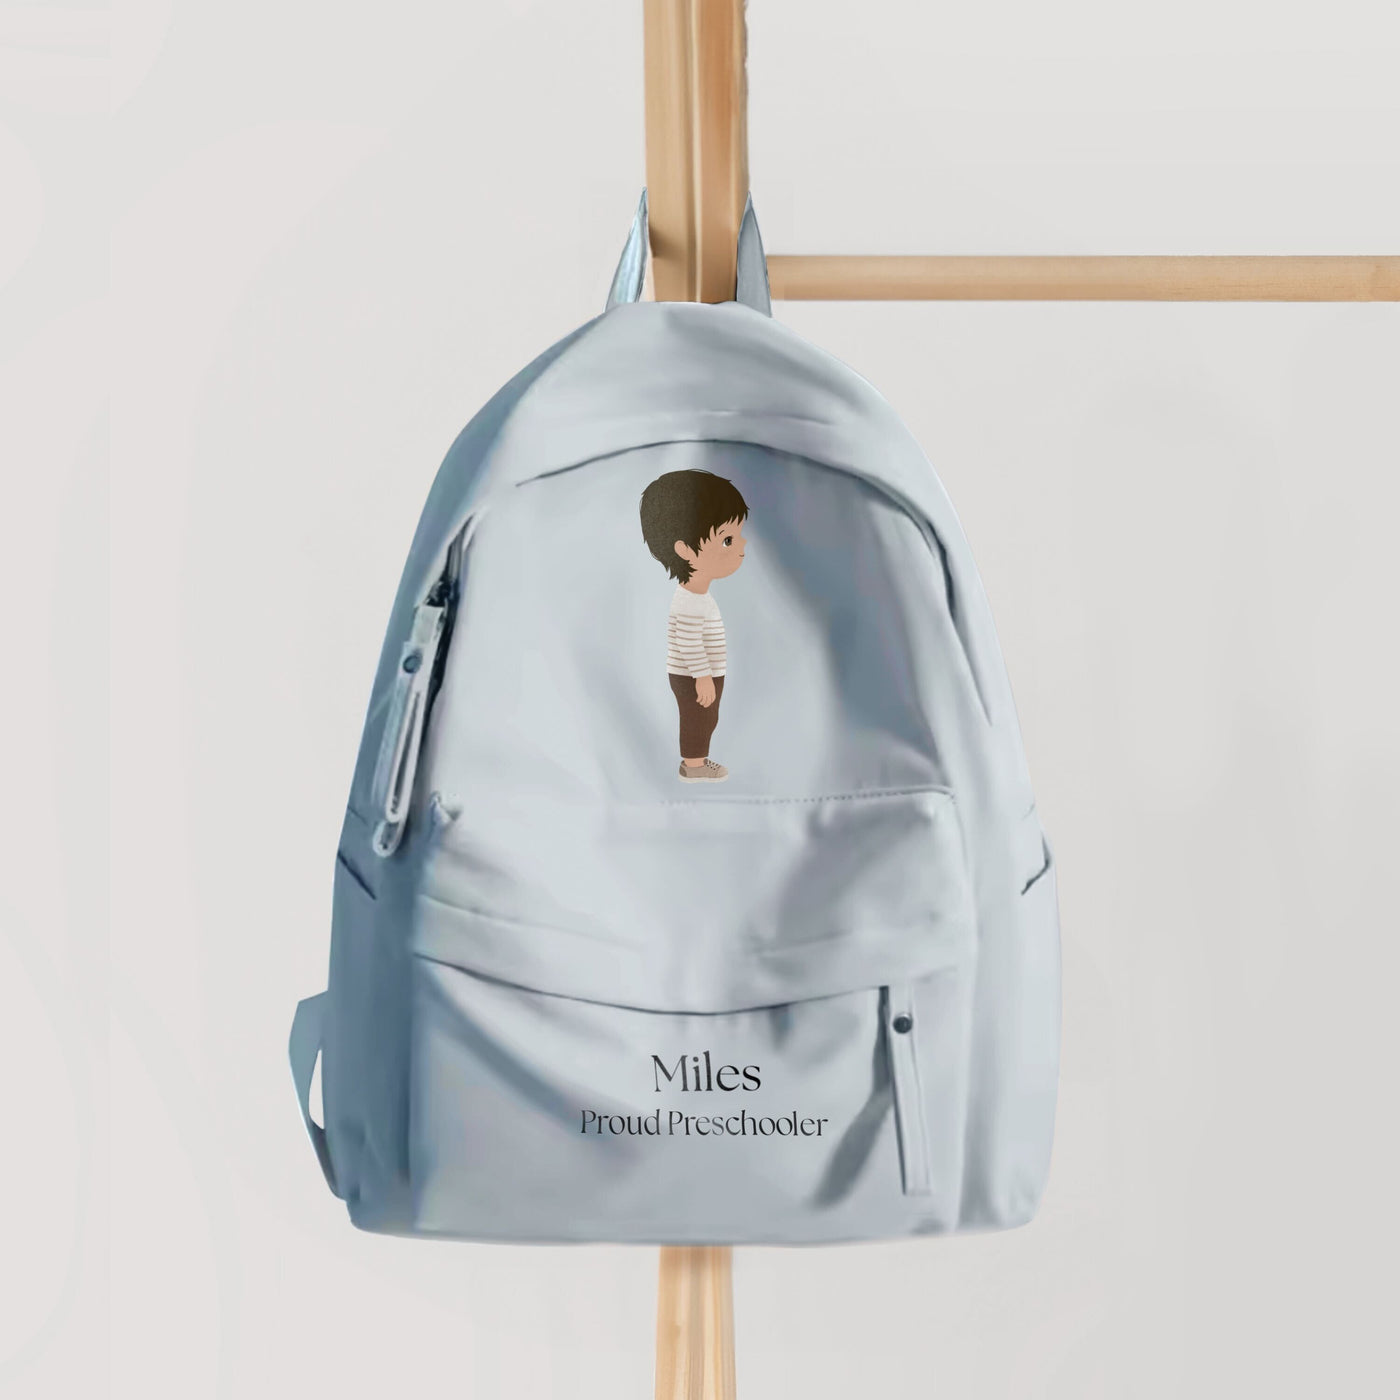 Personalized Backpacks With a Custom Illustration of Your Child